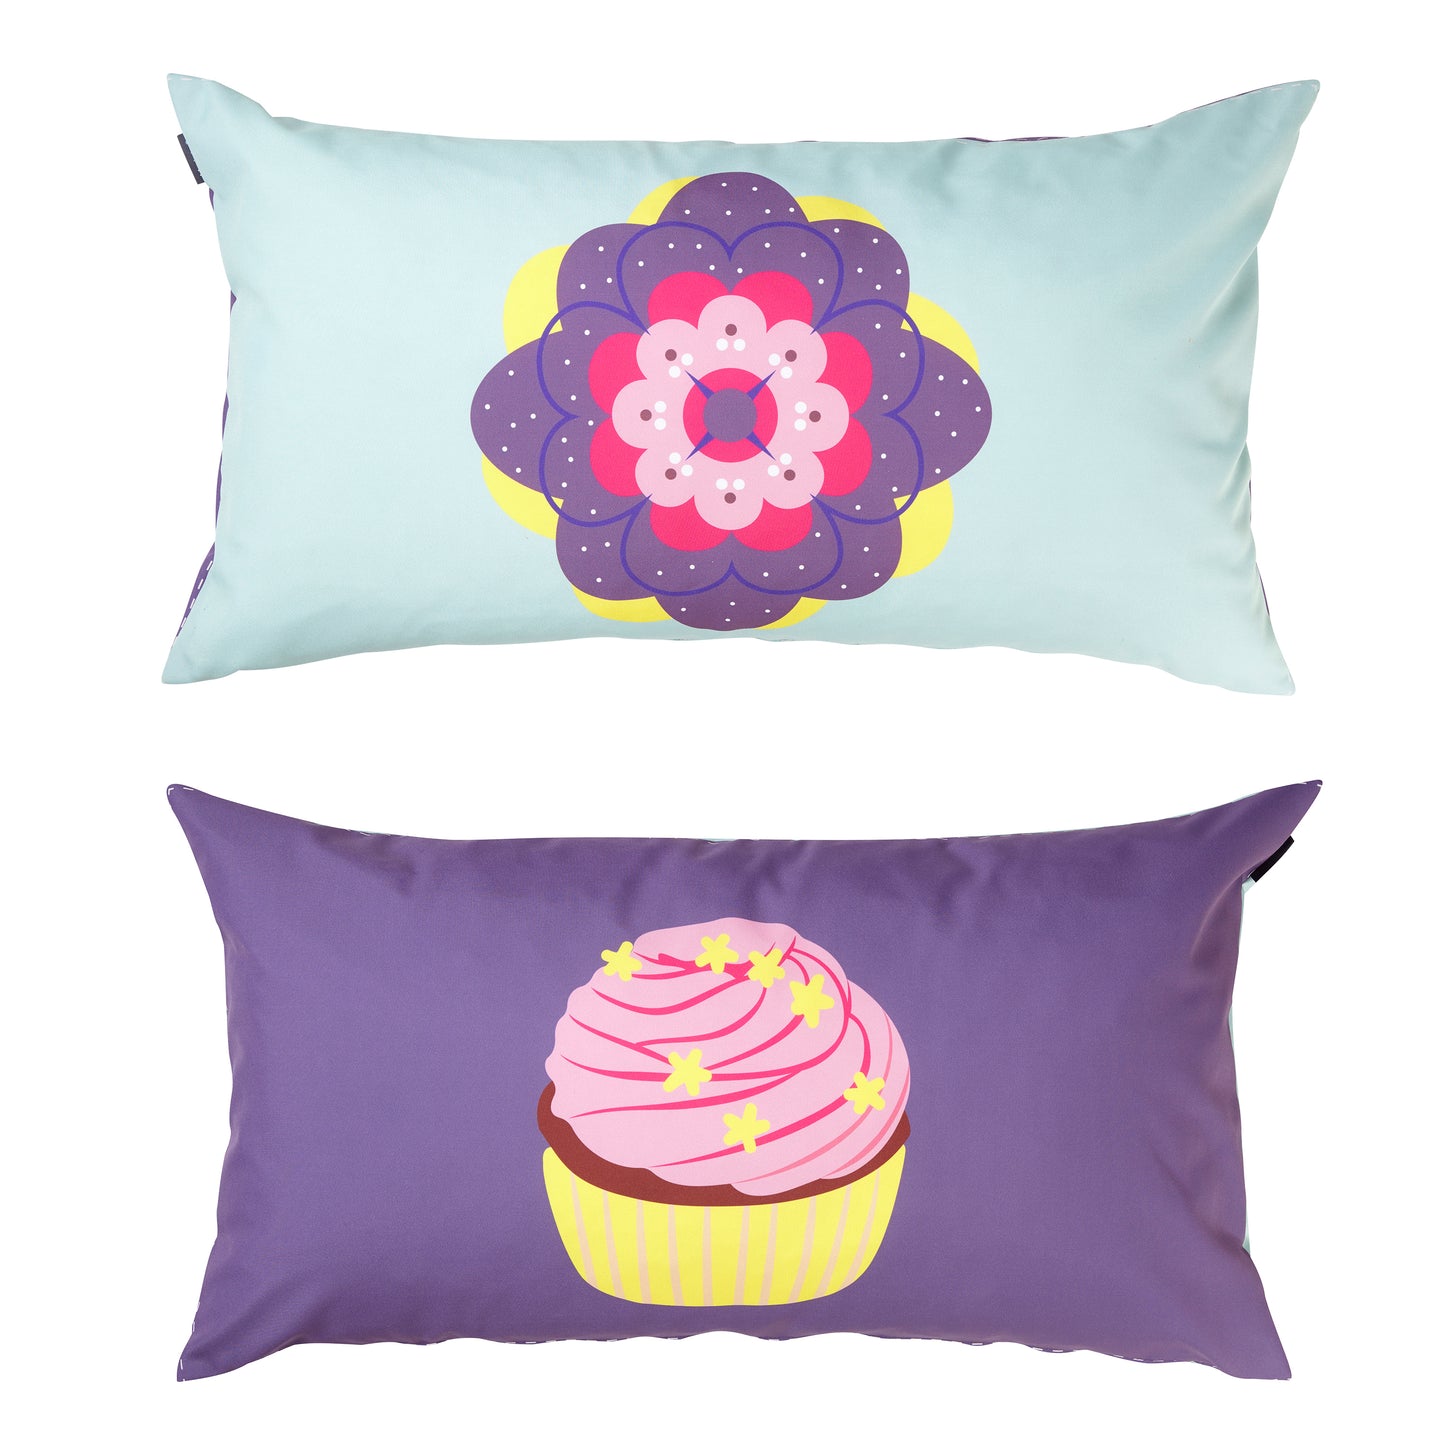 Manis-h  Set of 2 Cushion Covers in a Cup cake & Flower Design